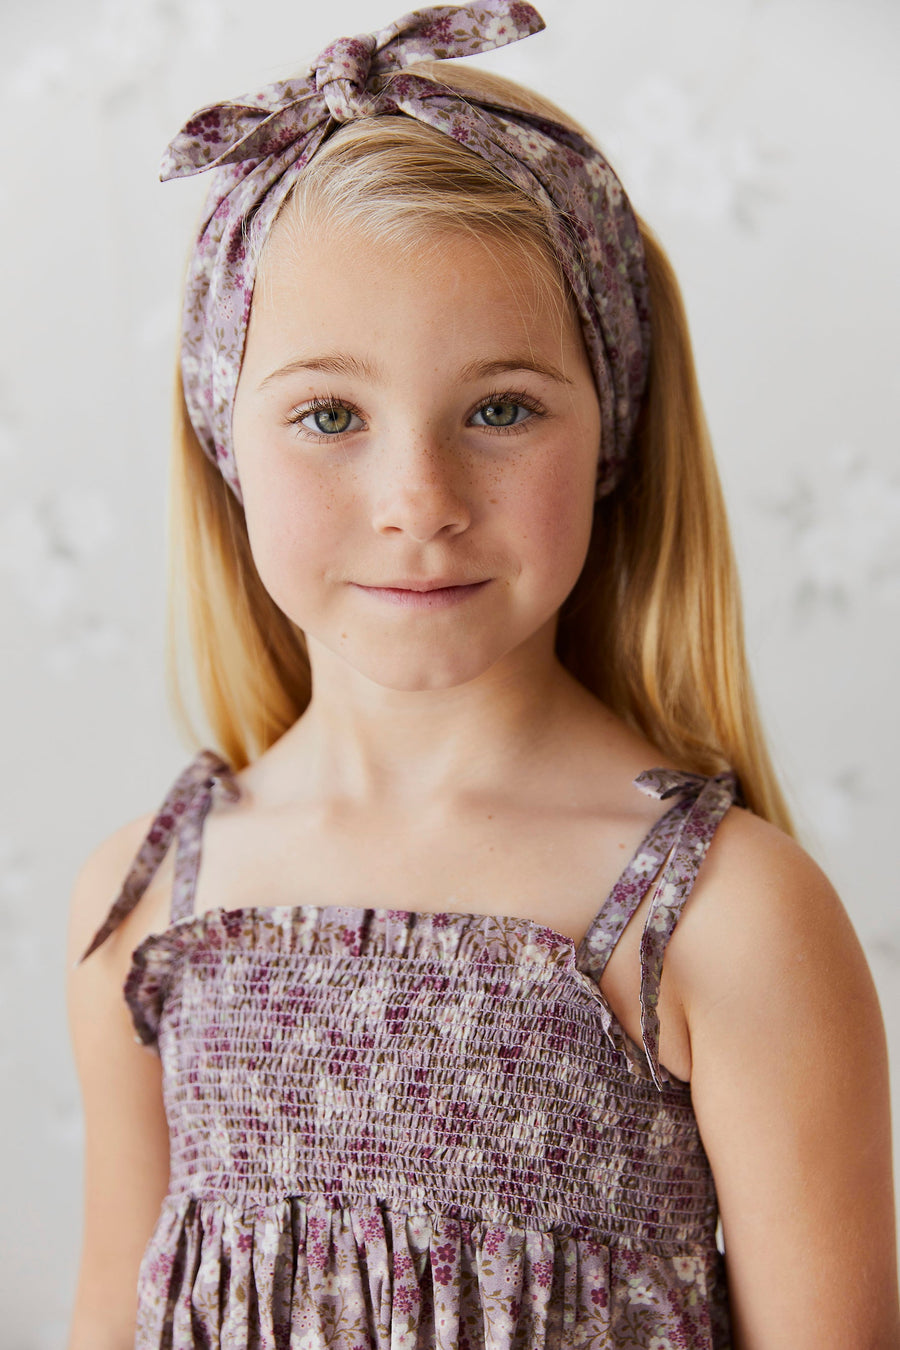 Organic Cotton Eveleigh Dress - Pansy Floral Fawn Childrens Dress from Jamie Kay NZ